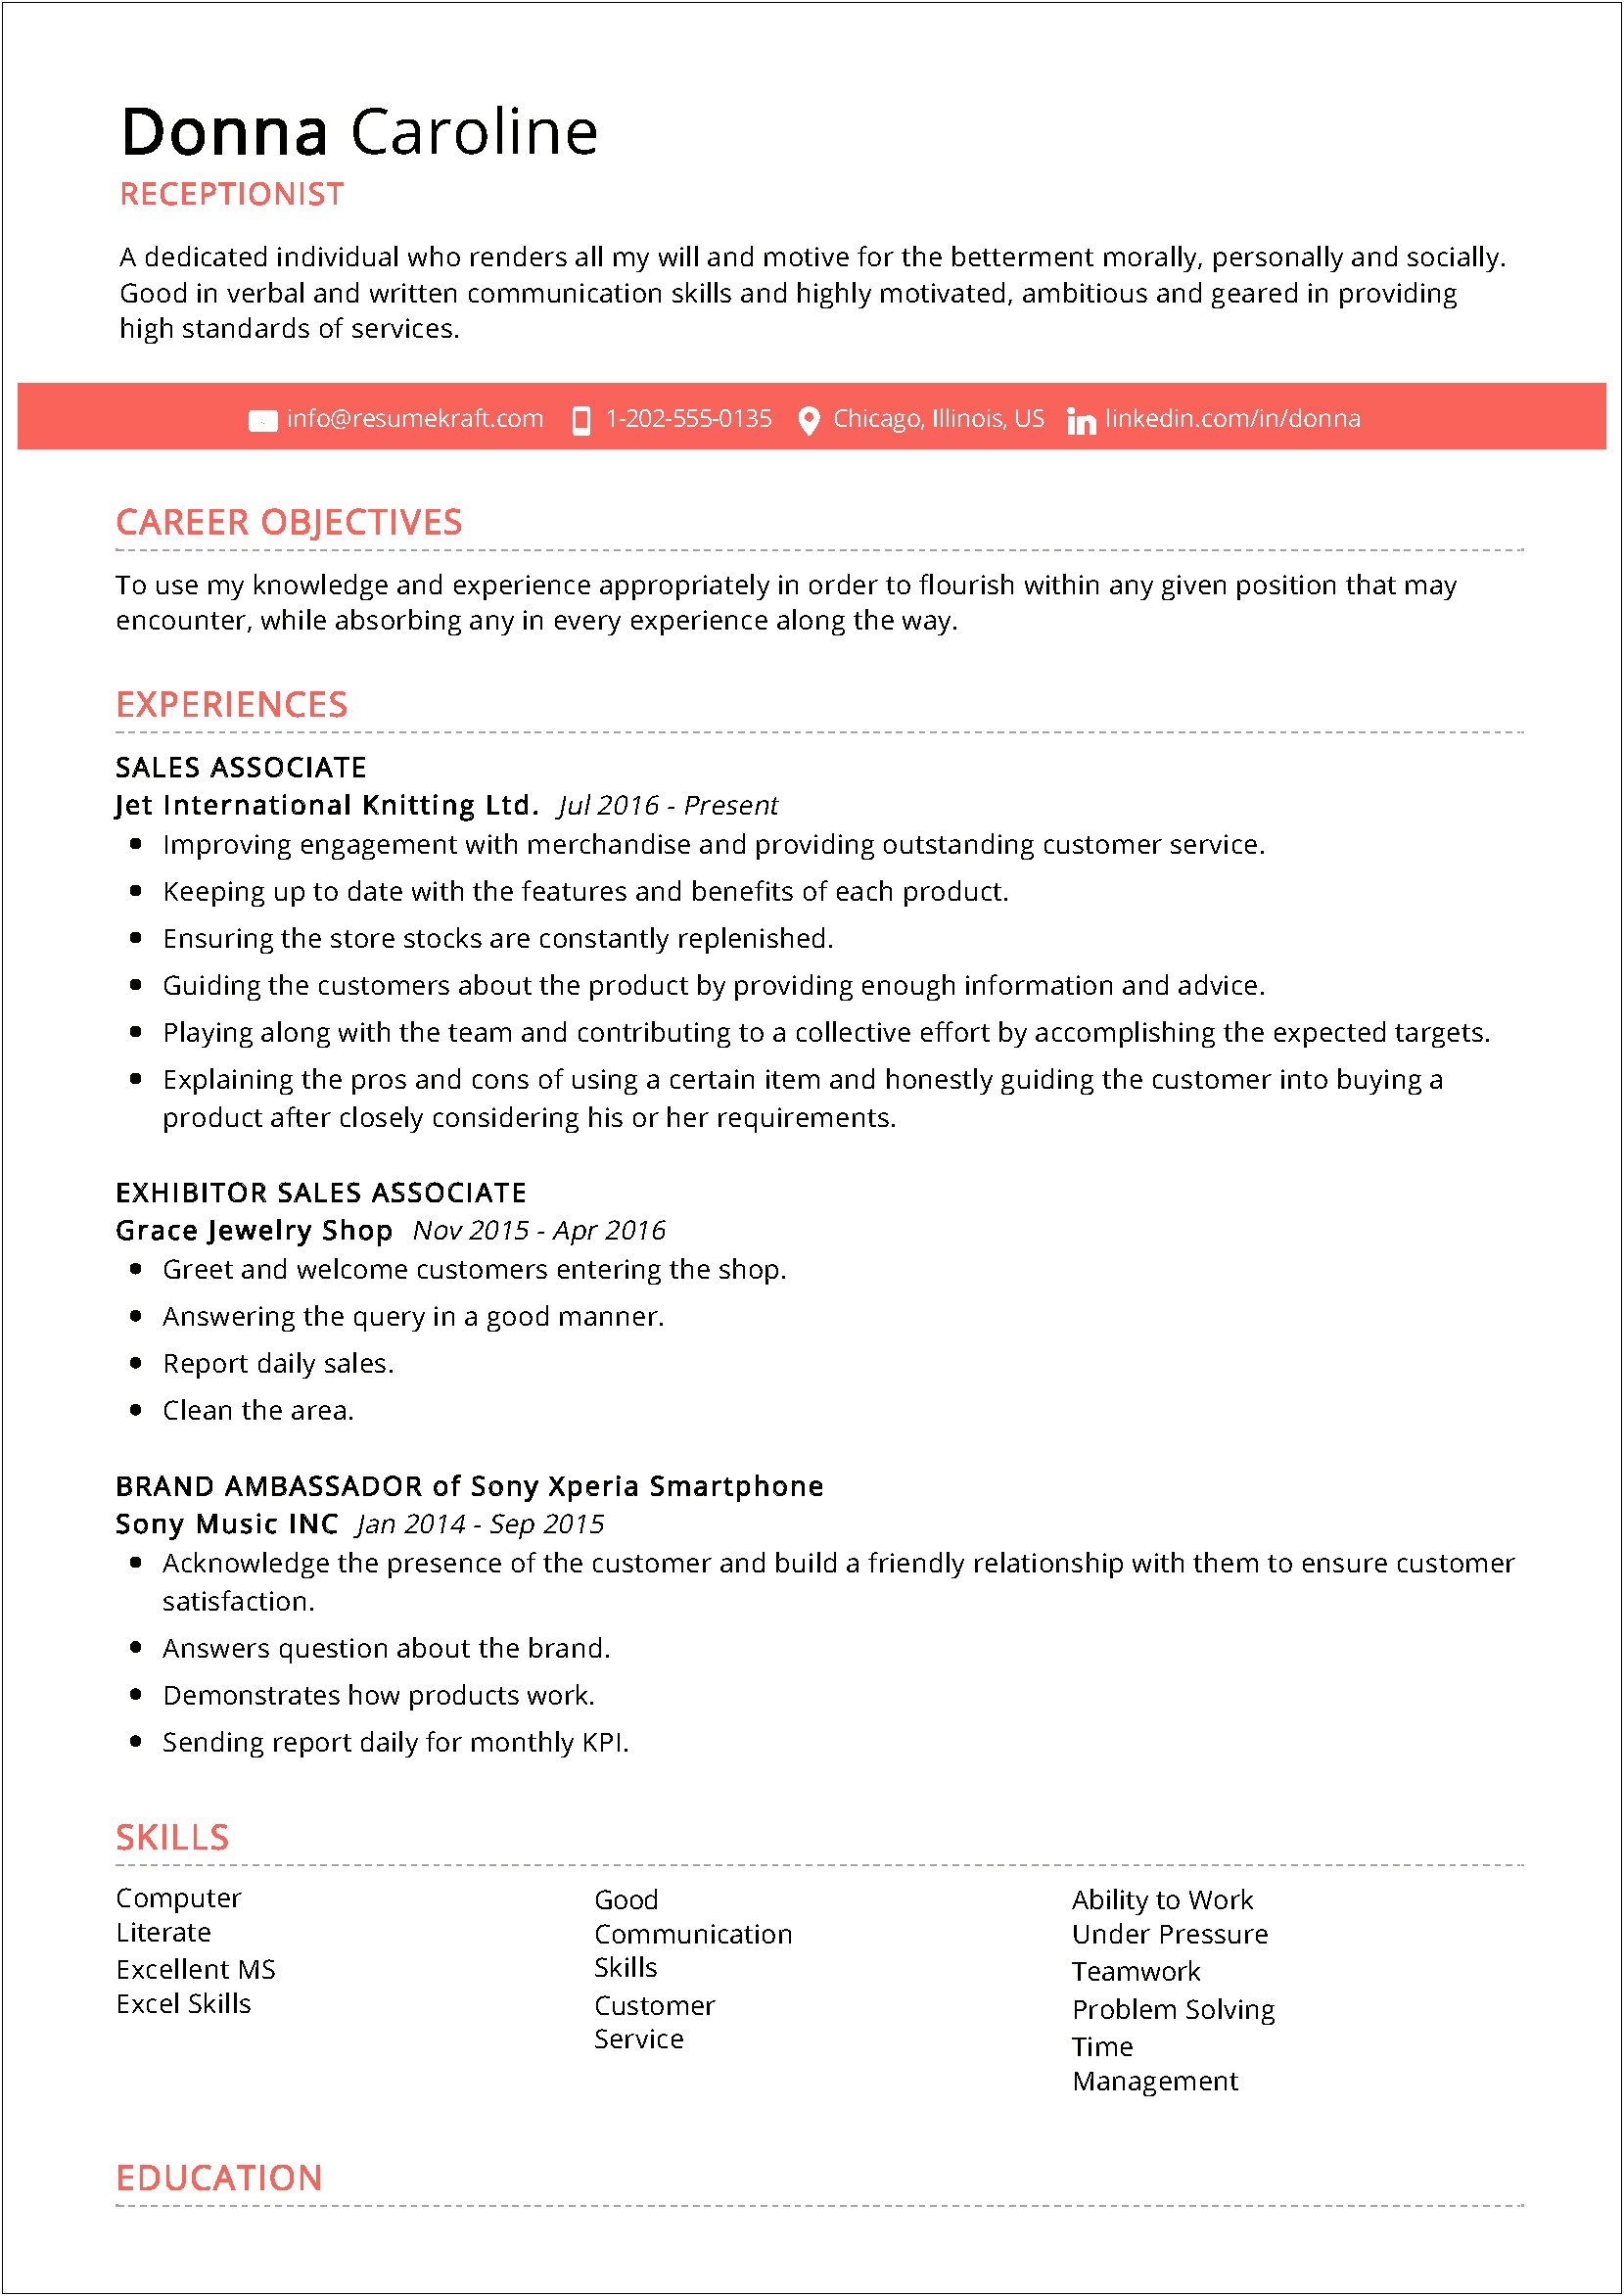 Example Of Experience Summary On Resume For Receptionist